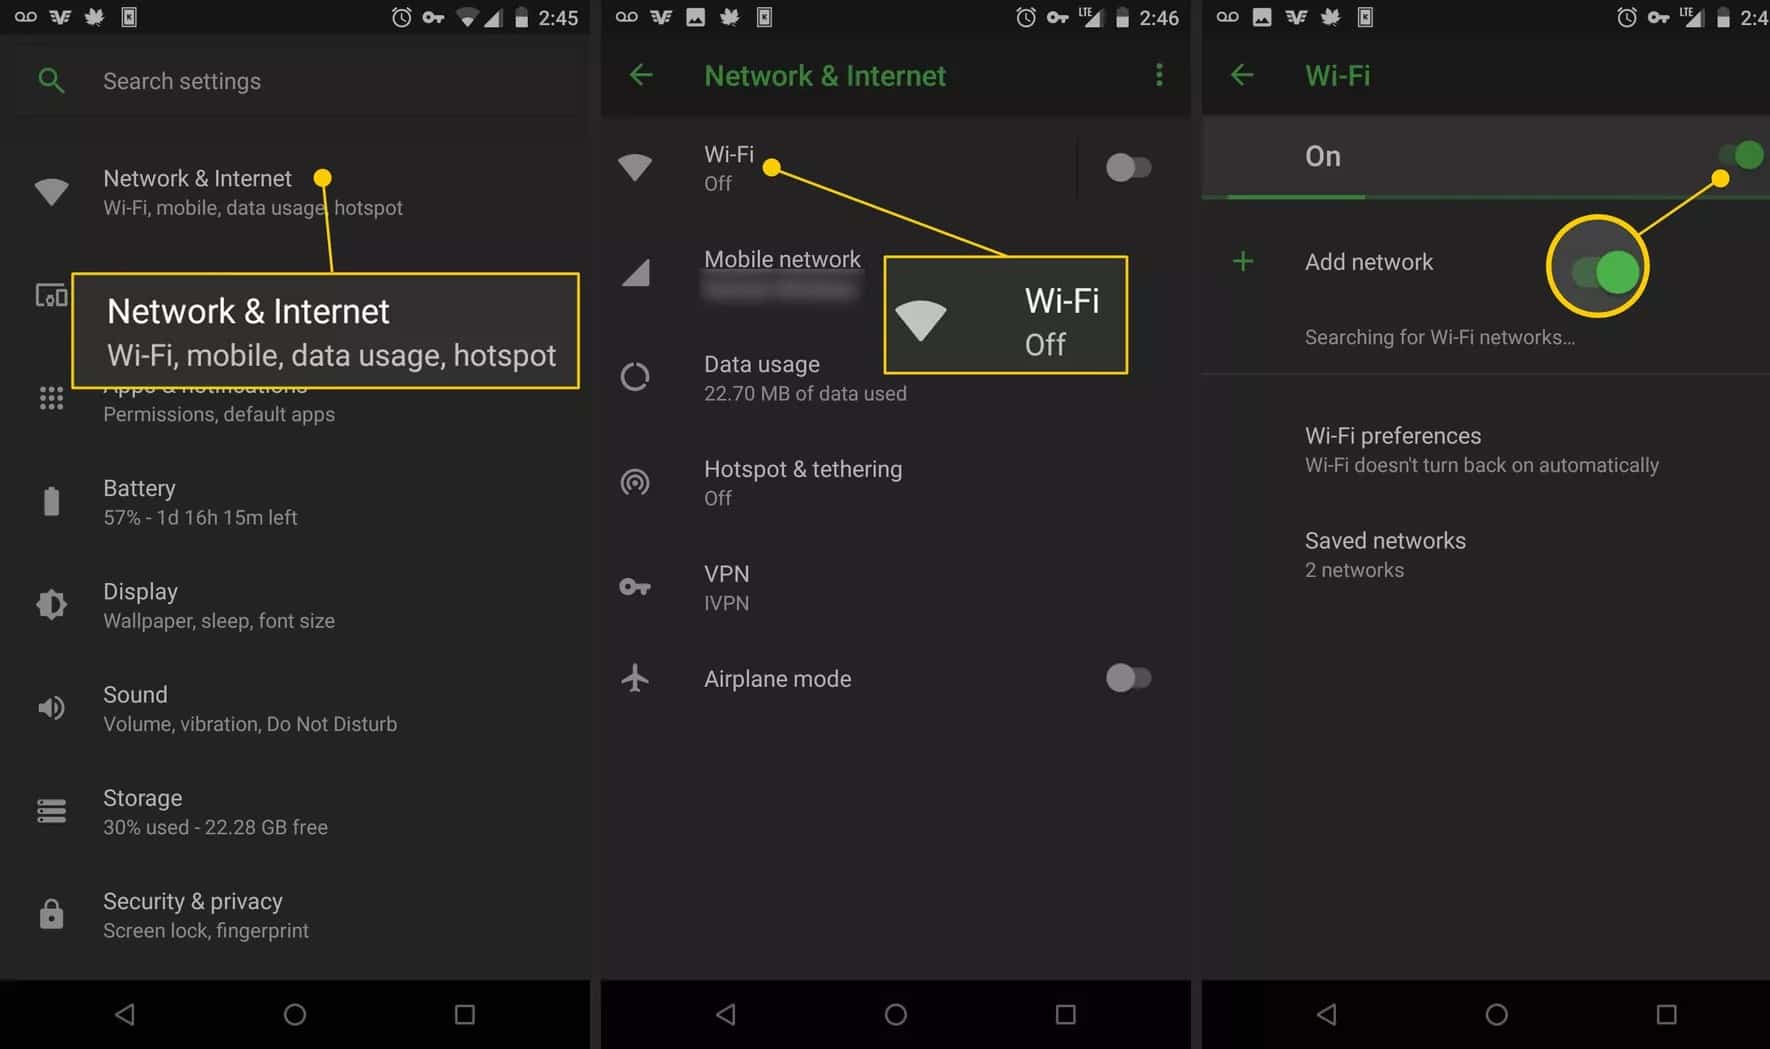 How To Connect Your Android Device To Wi-FI